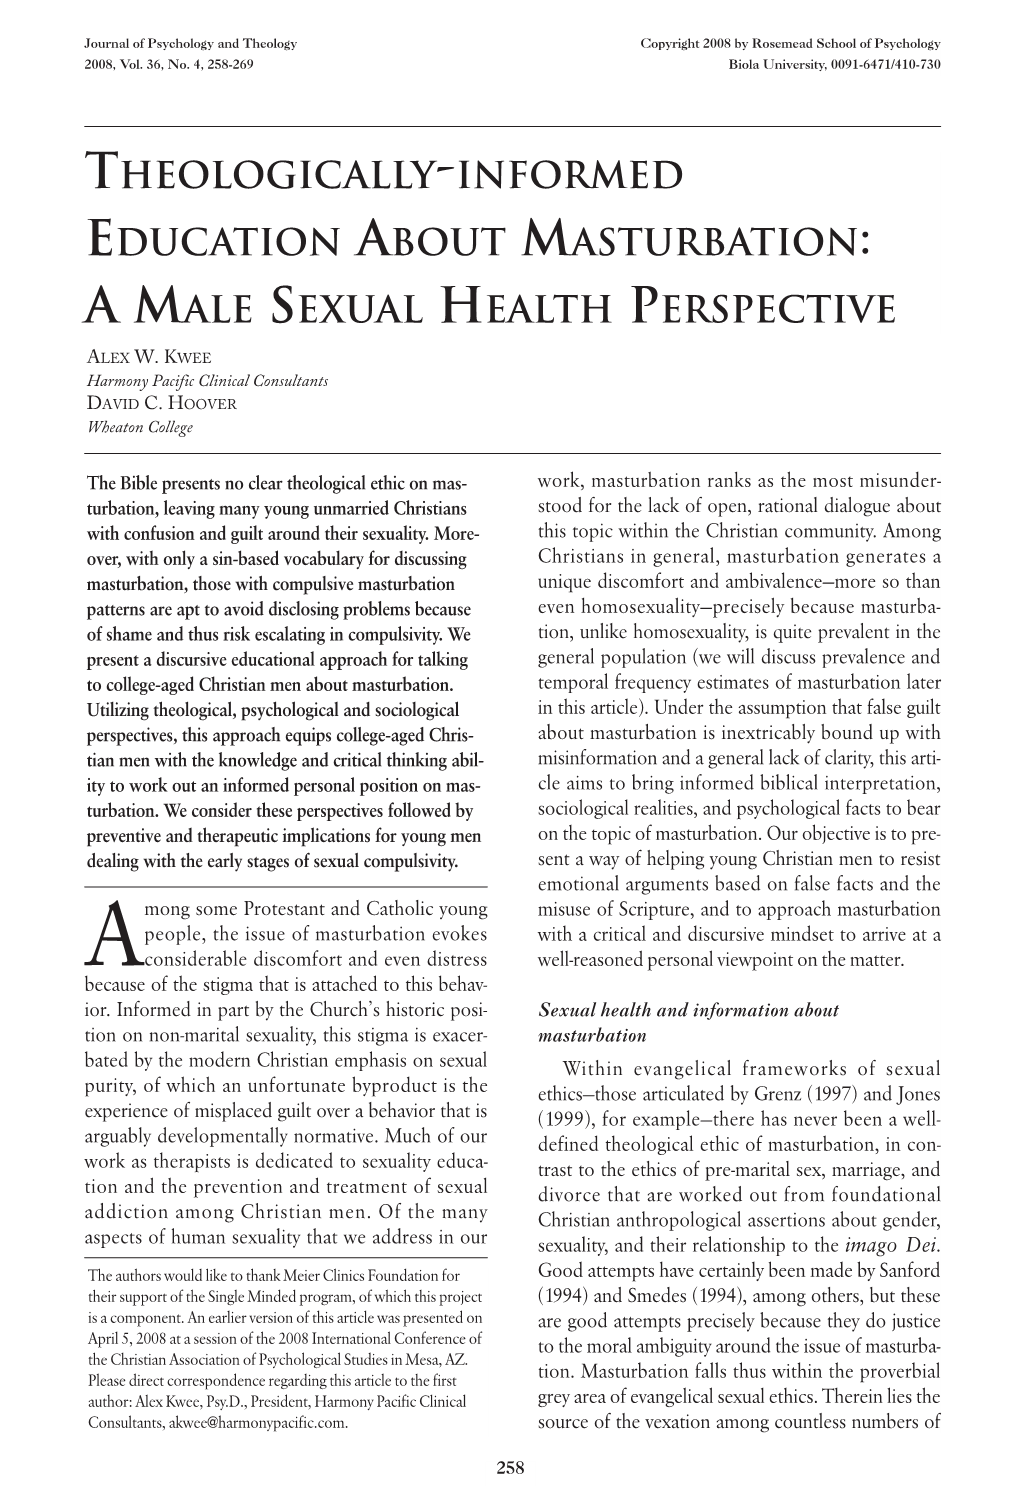 Theologically-Informed Education About Masturbation: a Male Sexual Health Perspective